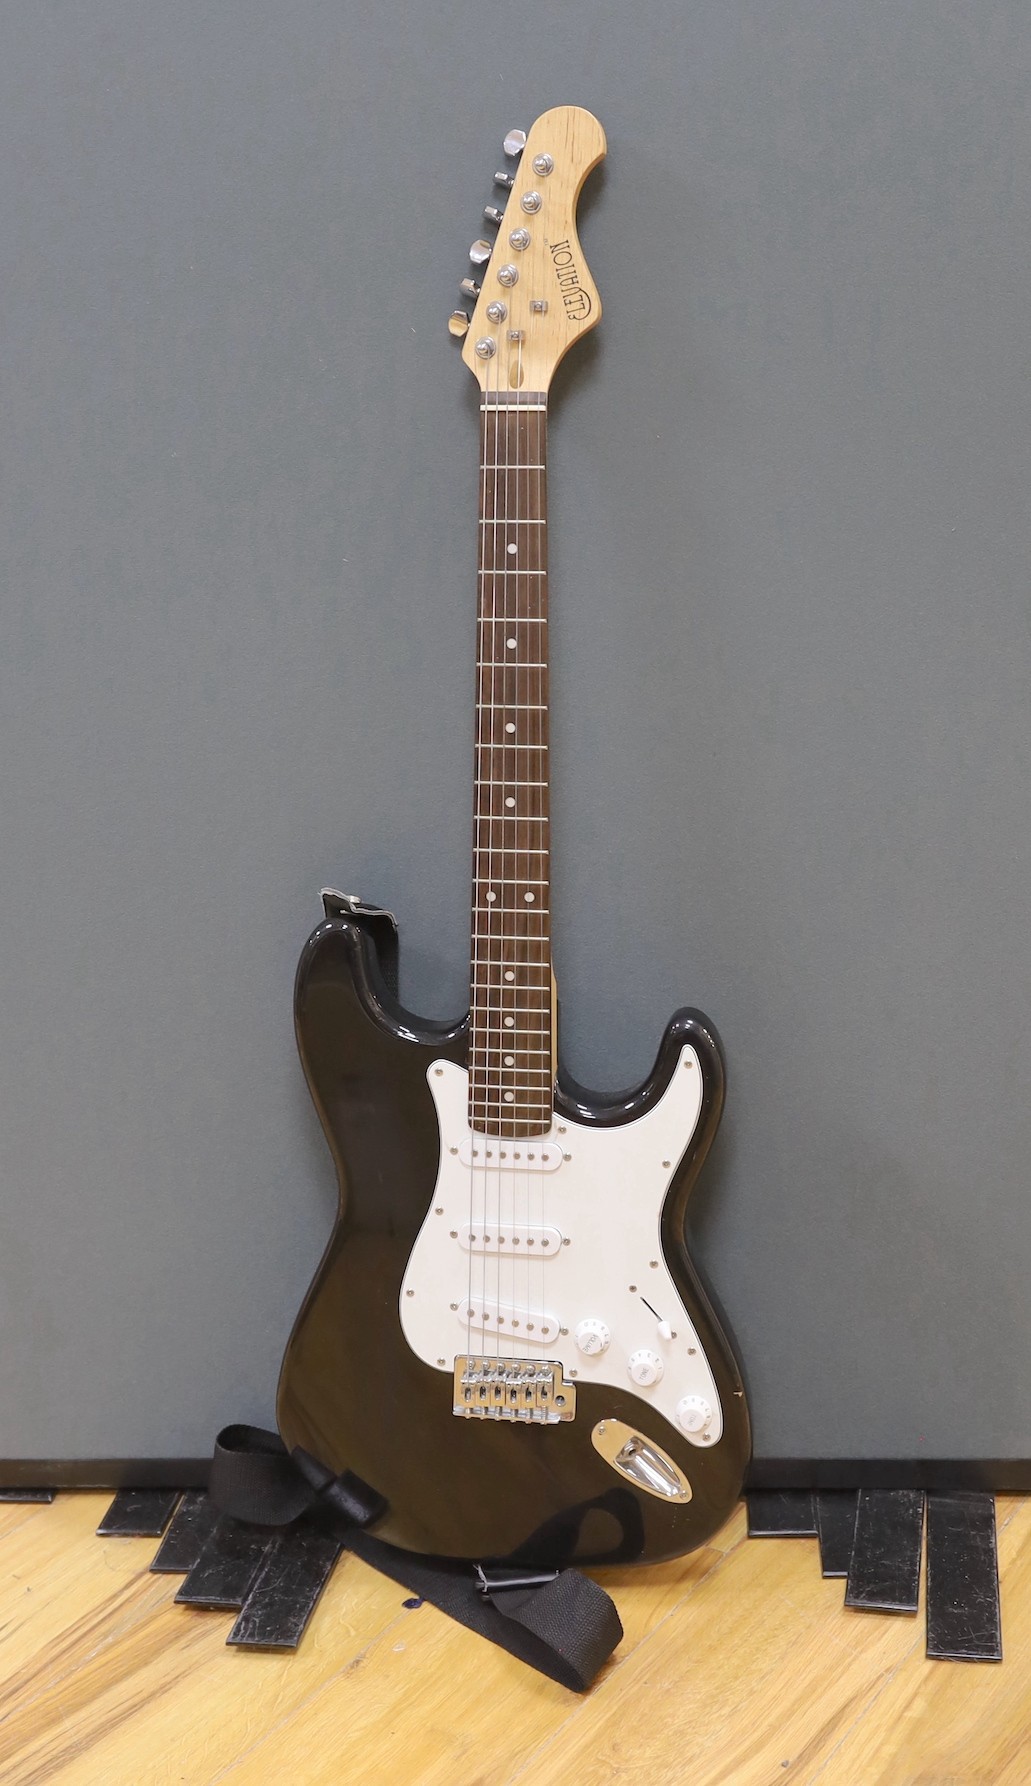 An Elevation electric guitar and soft case